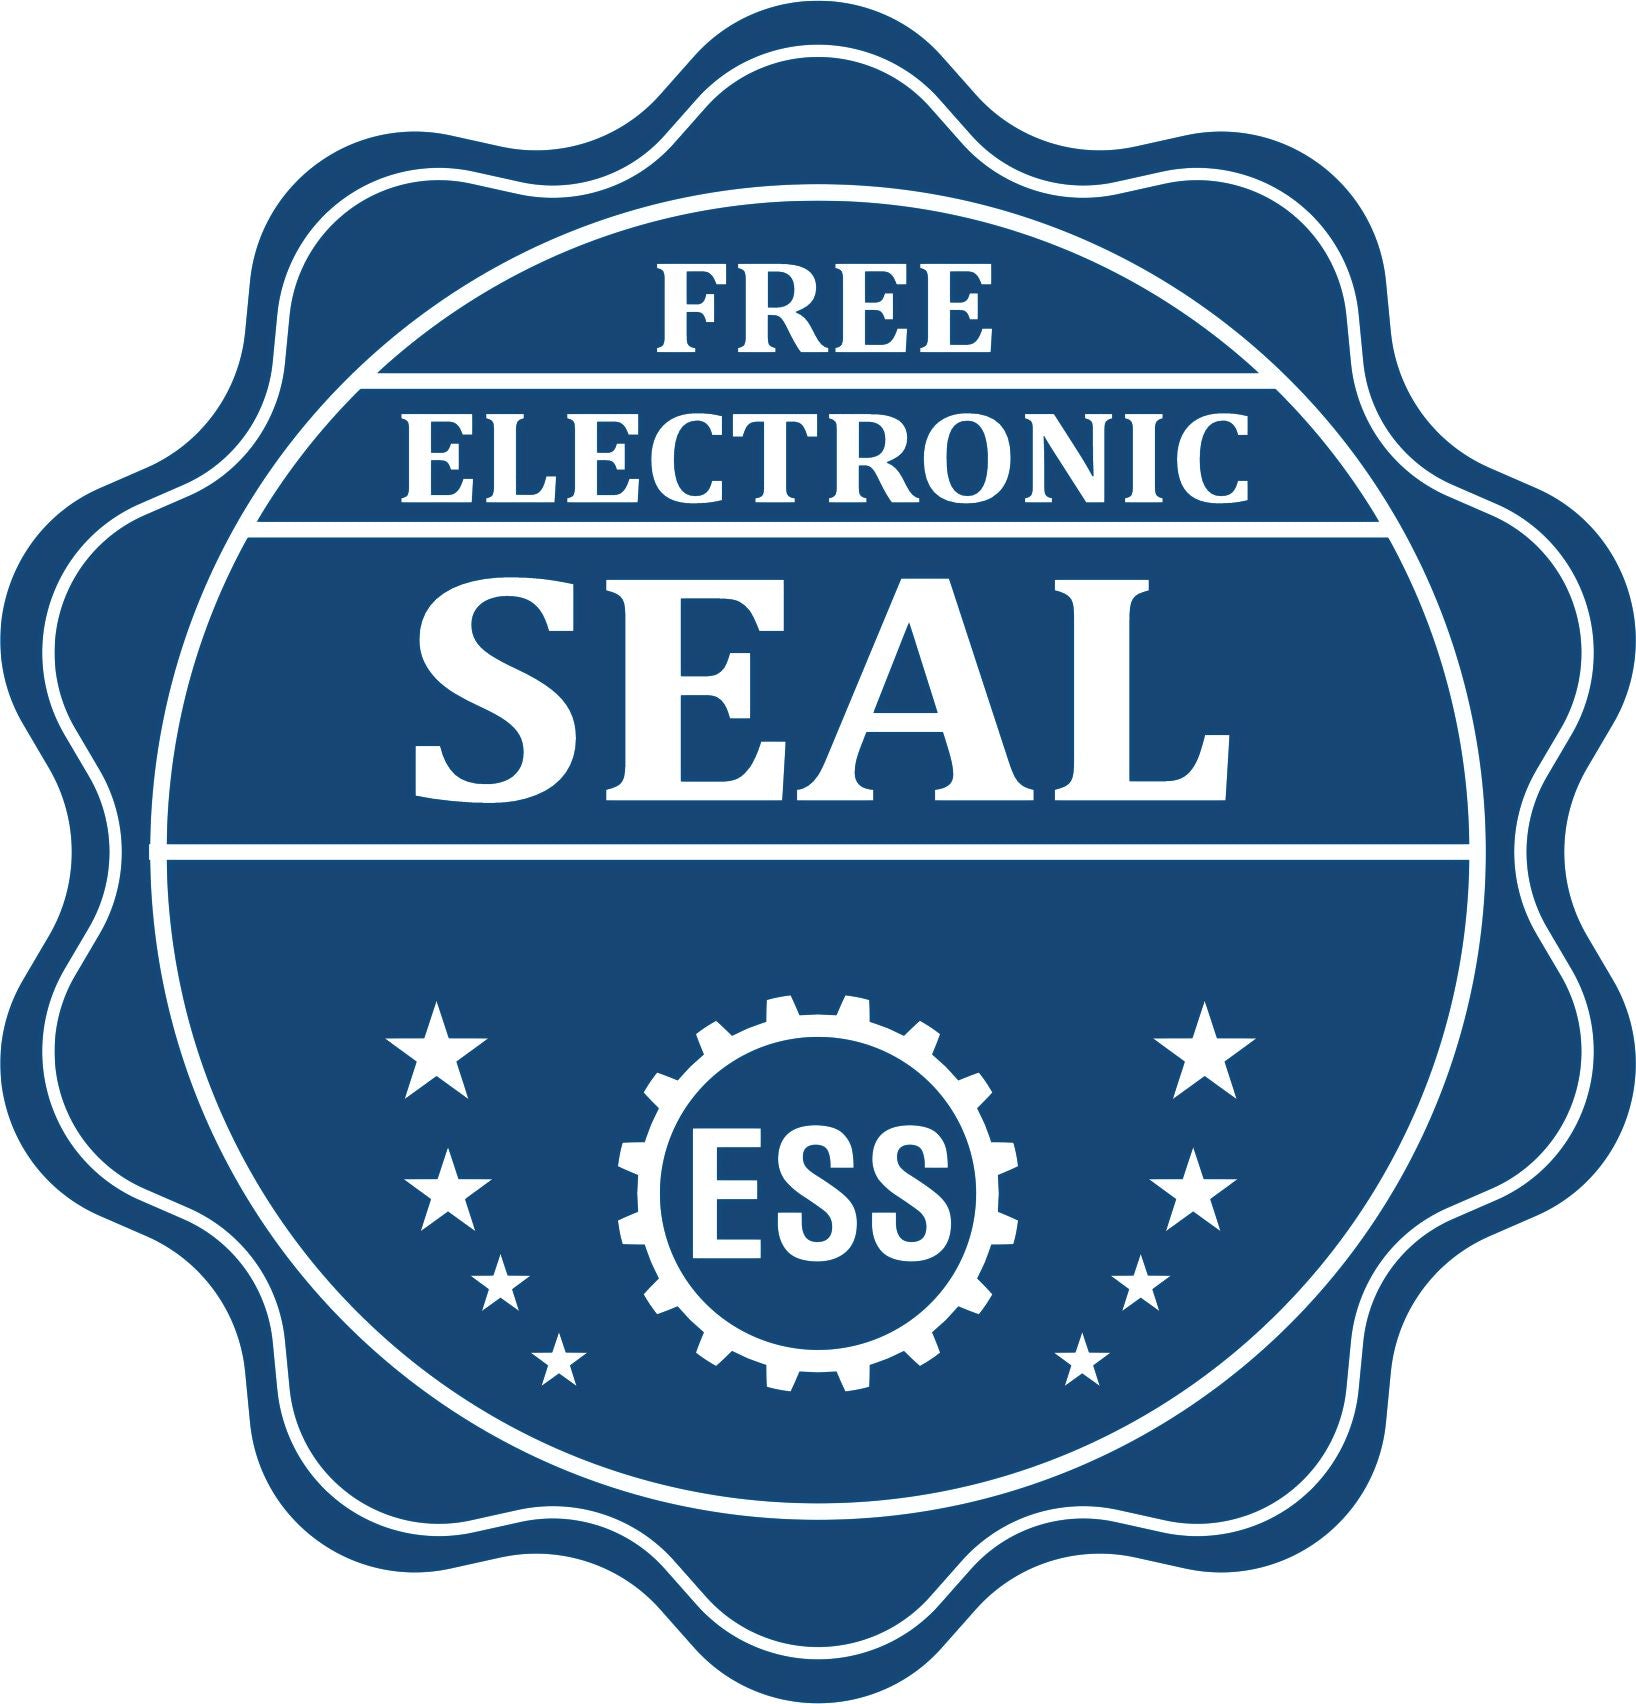 A badge showing a free electronic seal for the Long Reach Maryland PE Seal with stars and the ESS gear on the emblem.